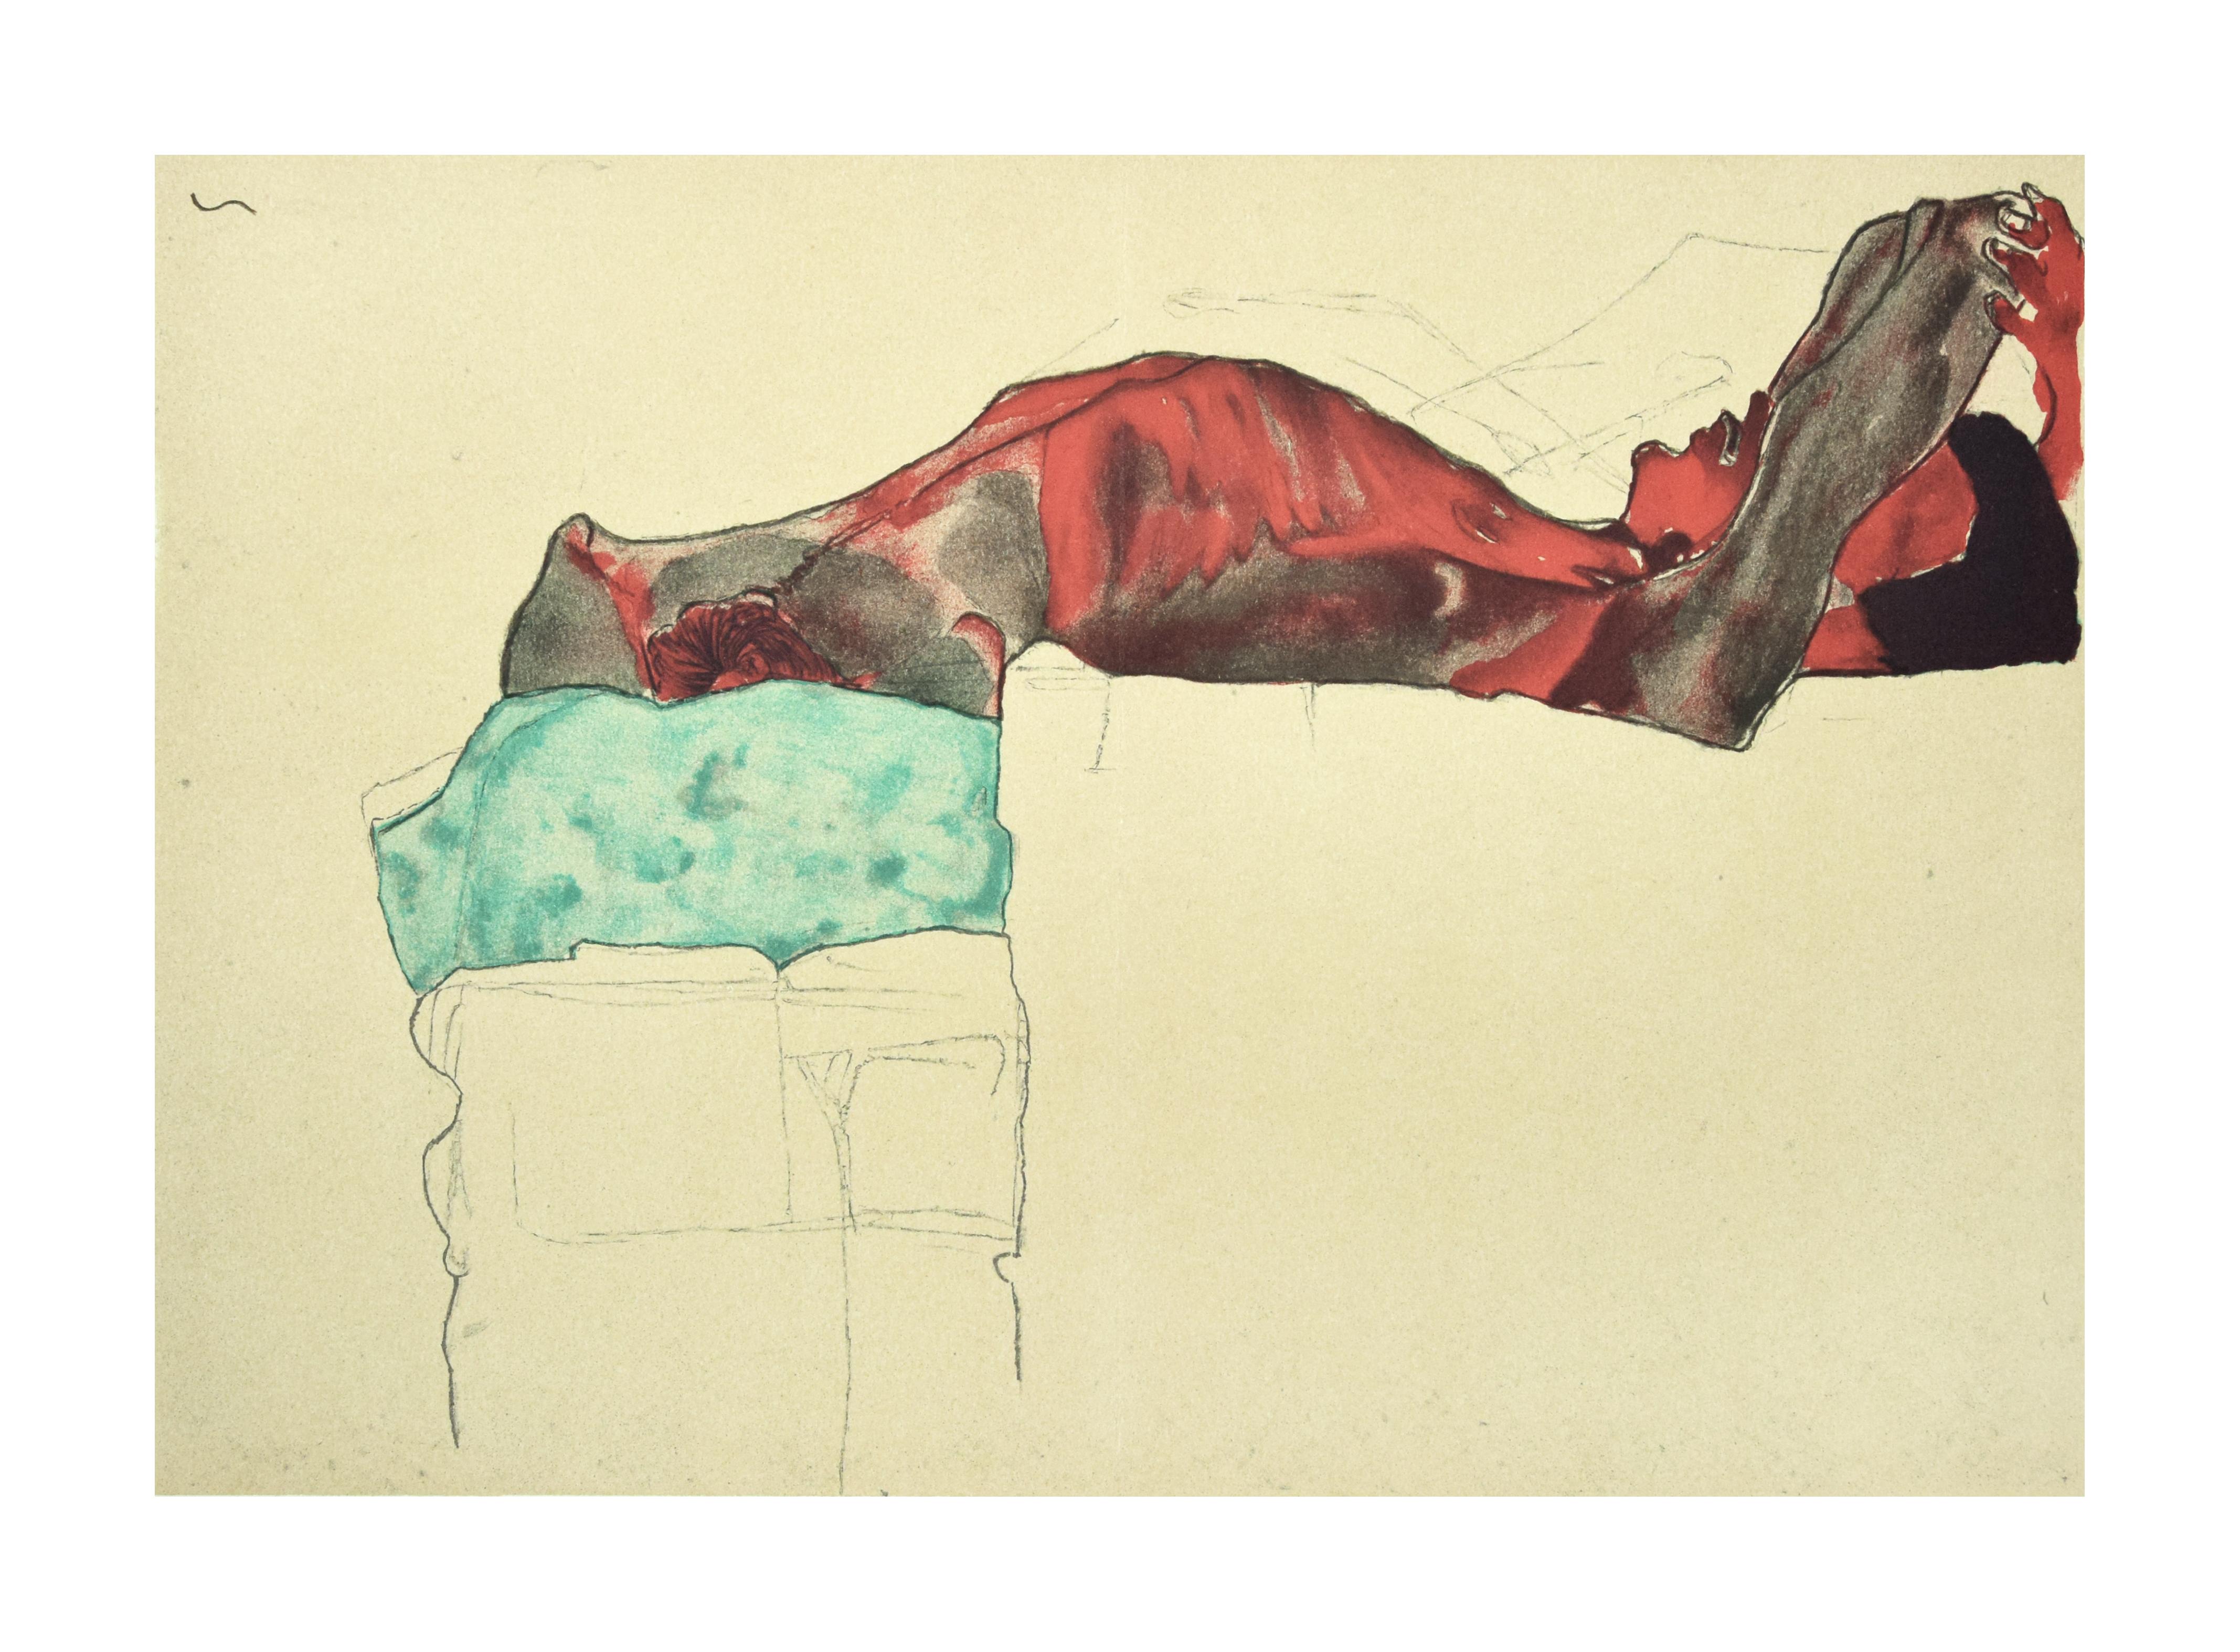 Reclining Male Reclining Male Nude with  - 2000s - Lithograph After Egon Schiele